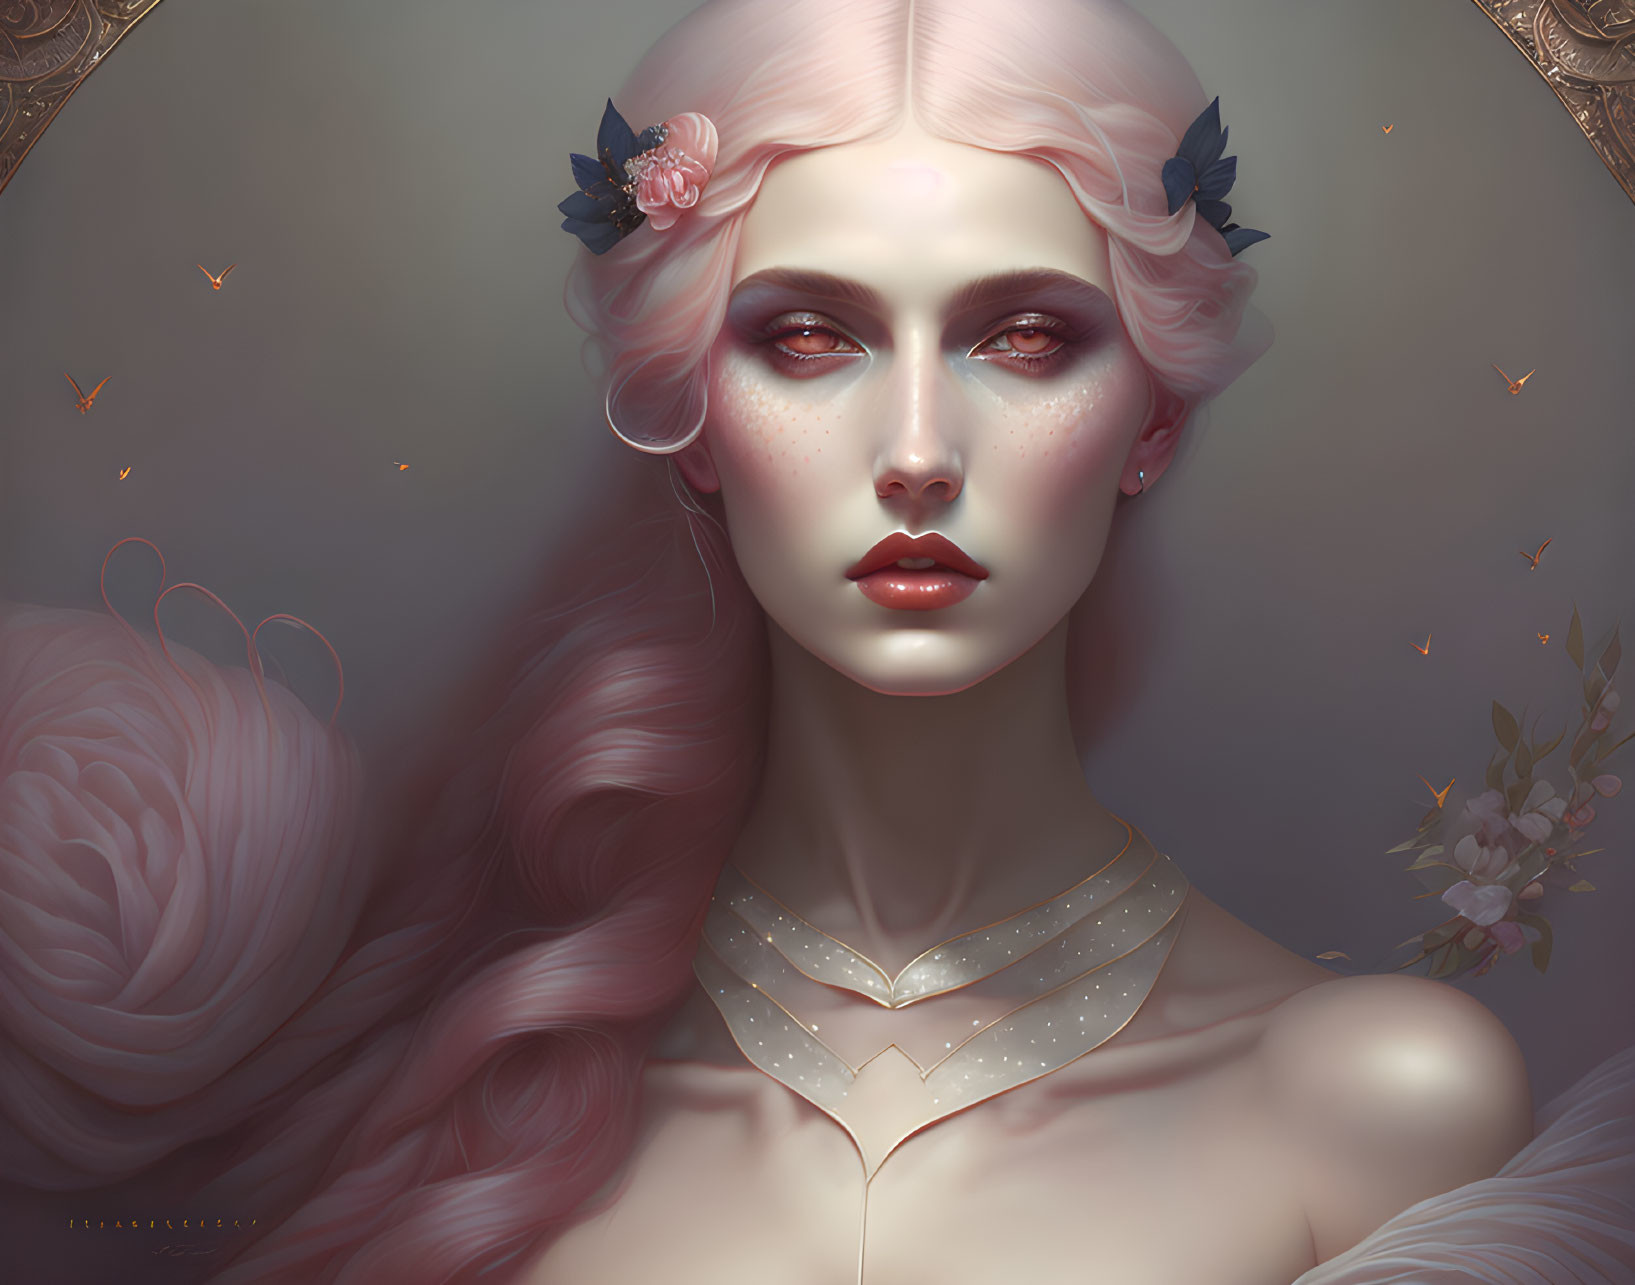 Ethereal woman with pink hair and butterflies in soft background